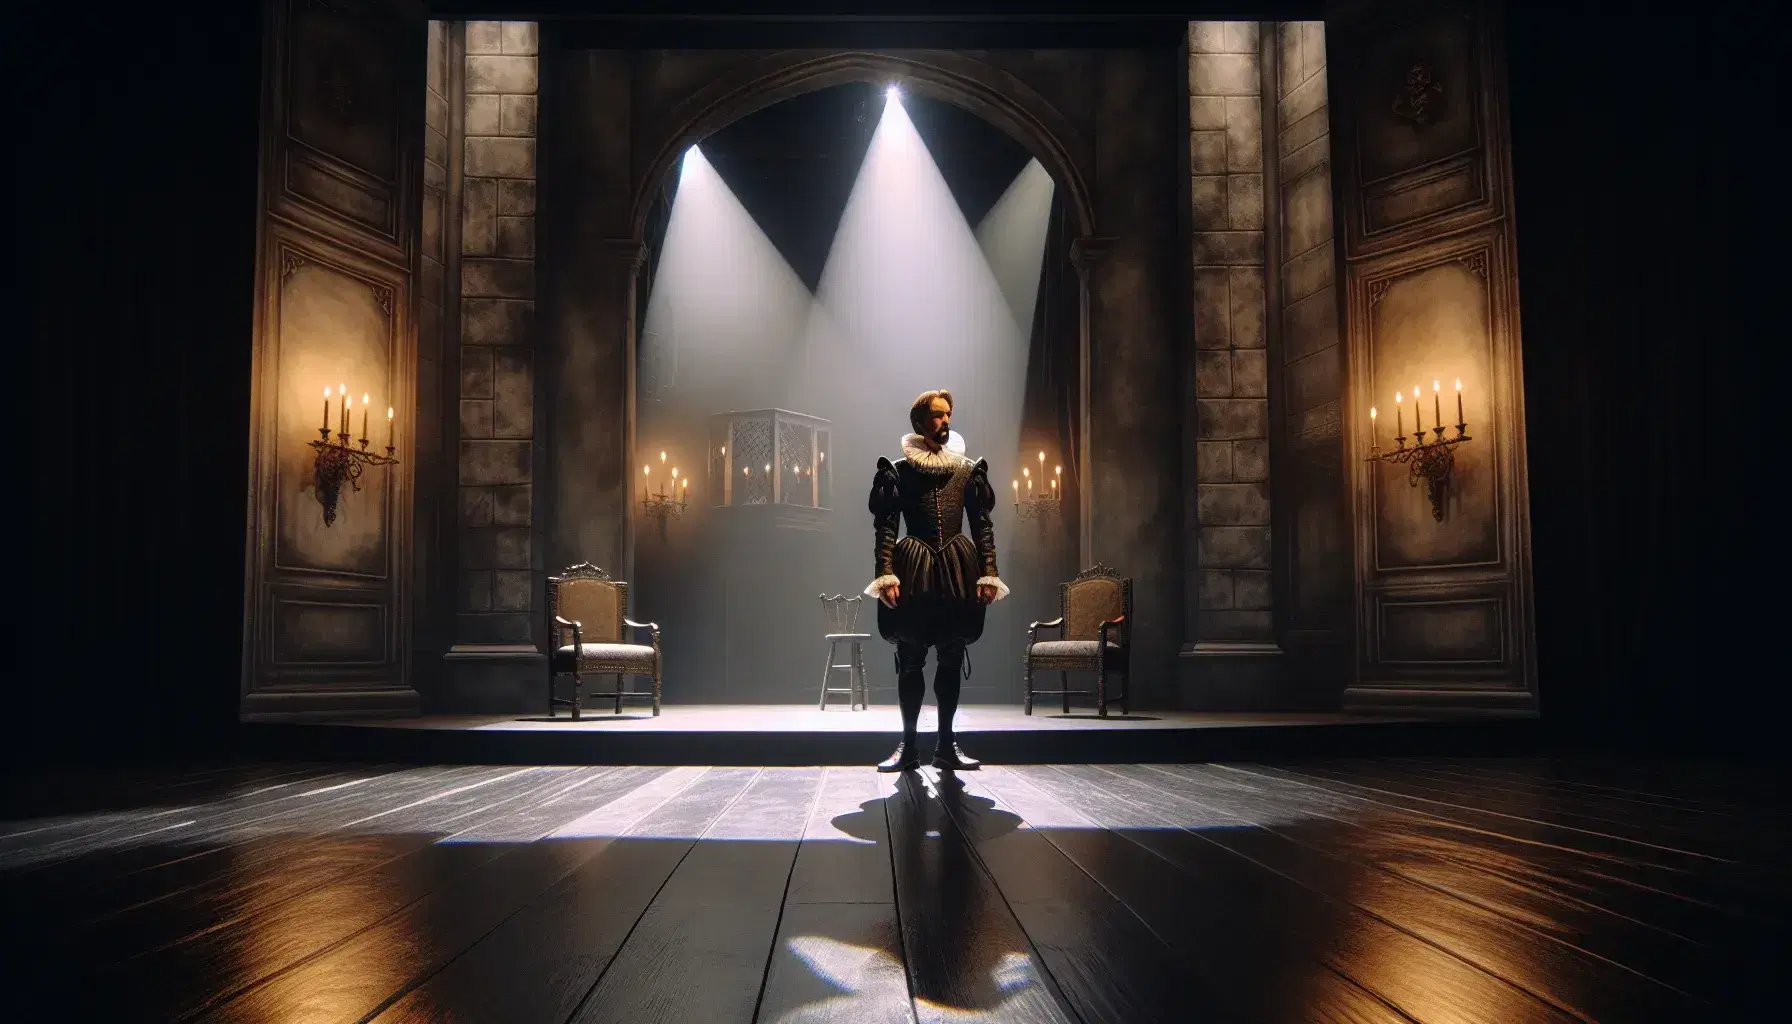 Scene from "Hamlet" with an actor in period costume on a stage with regal chairs and a backdrop of castle walls, soft and atmospheric lighting.